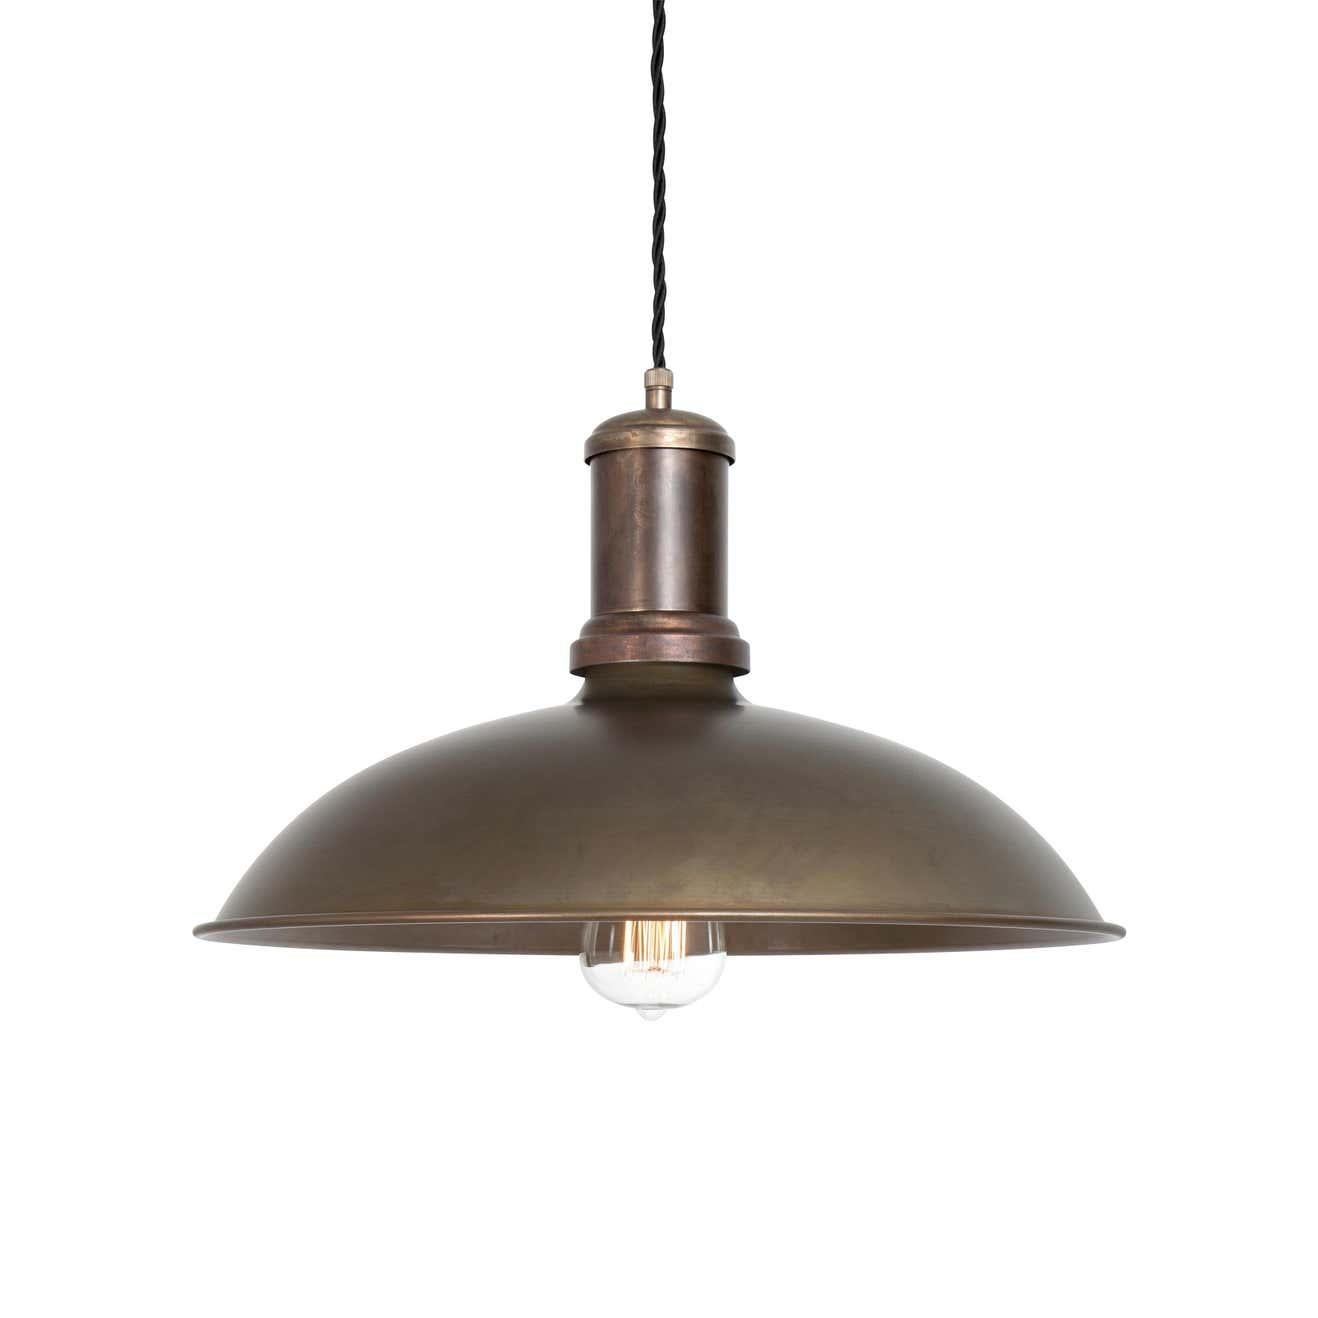 Sabina Grubbeson Large Kavaljer Iron Oxide Ceiling Lamp by Konsthantverk In New Condition For Sale In Barcelona, Barcelona